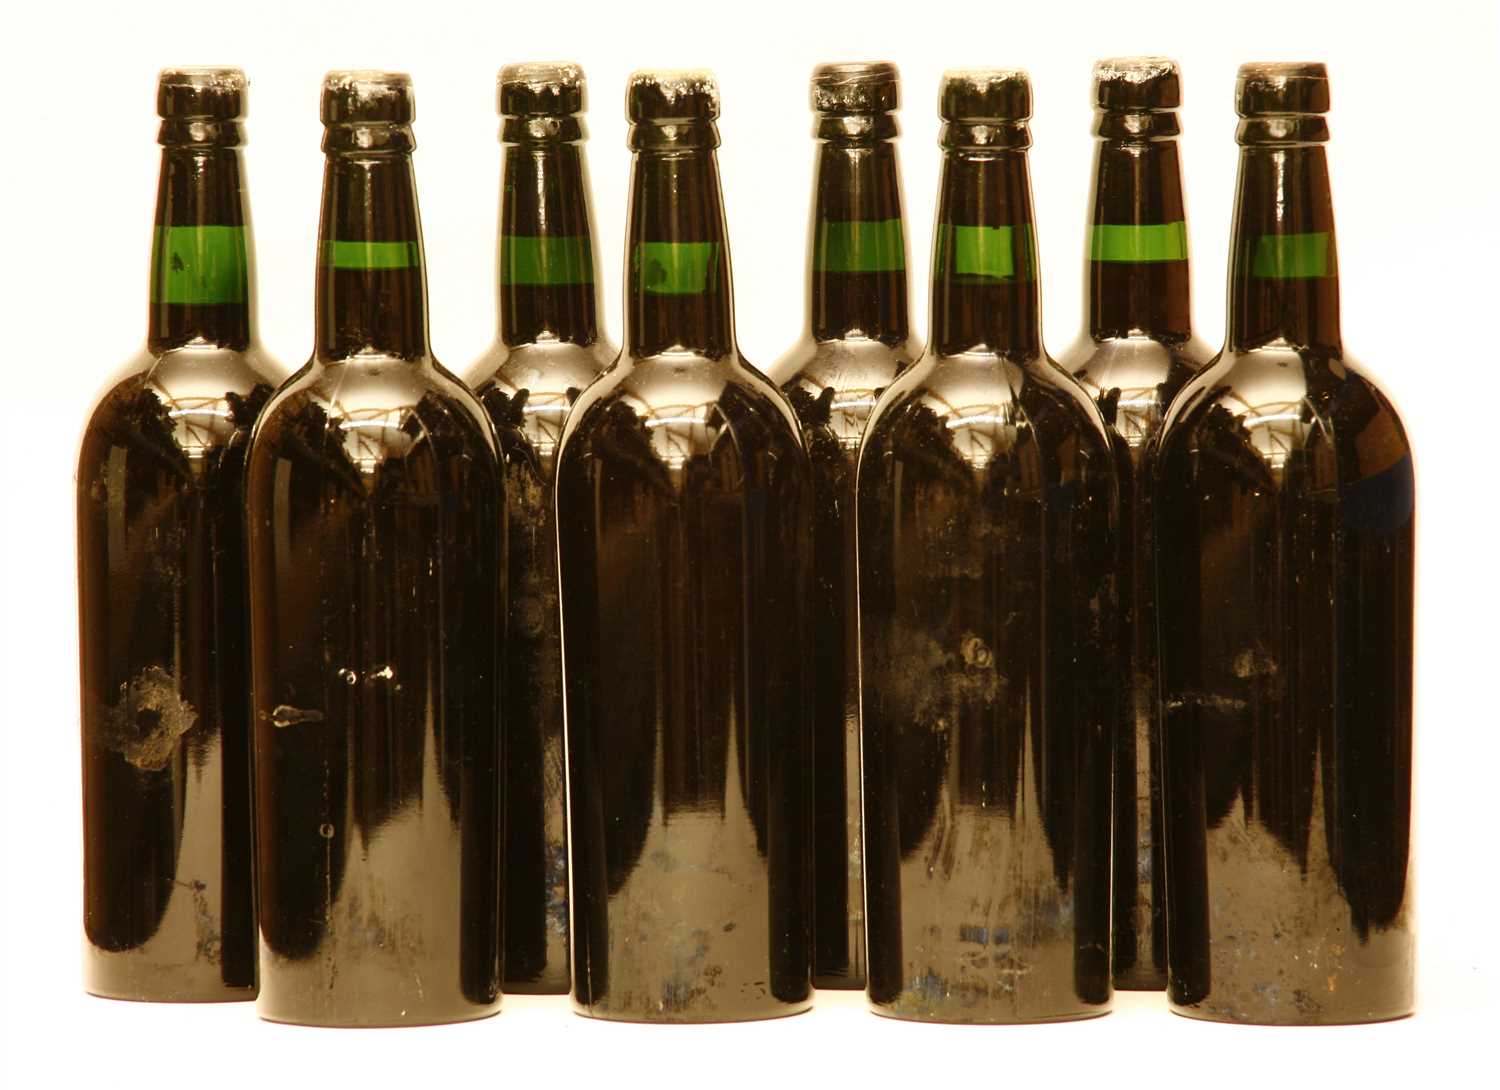 Lot 75 - Croft, 1963, eight bottles (date on corks, labels lacking, some capsules lacking)